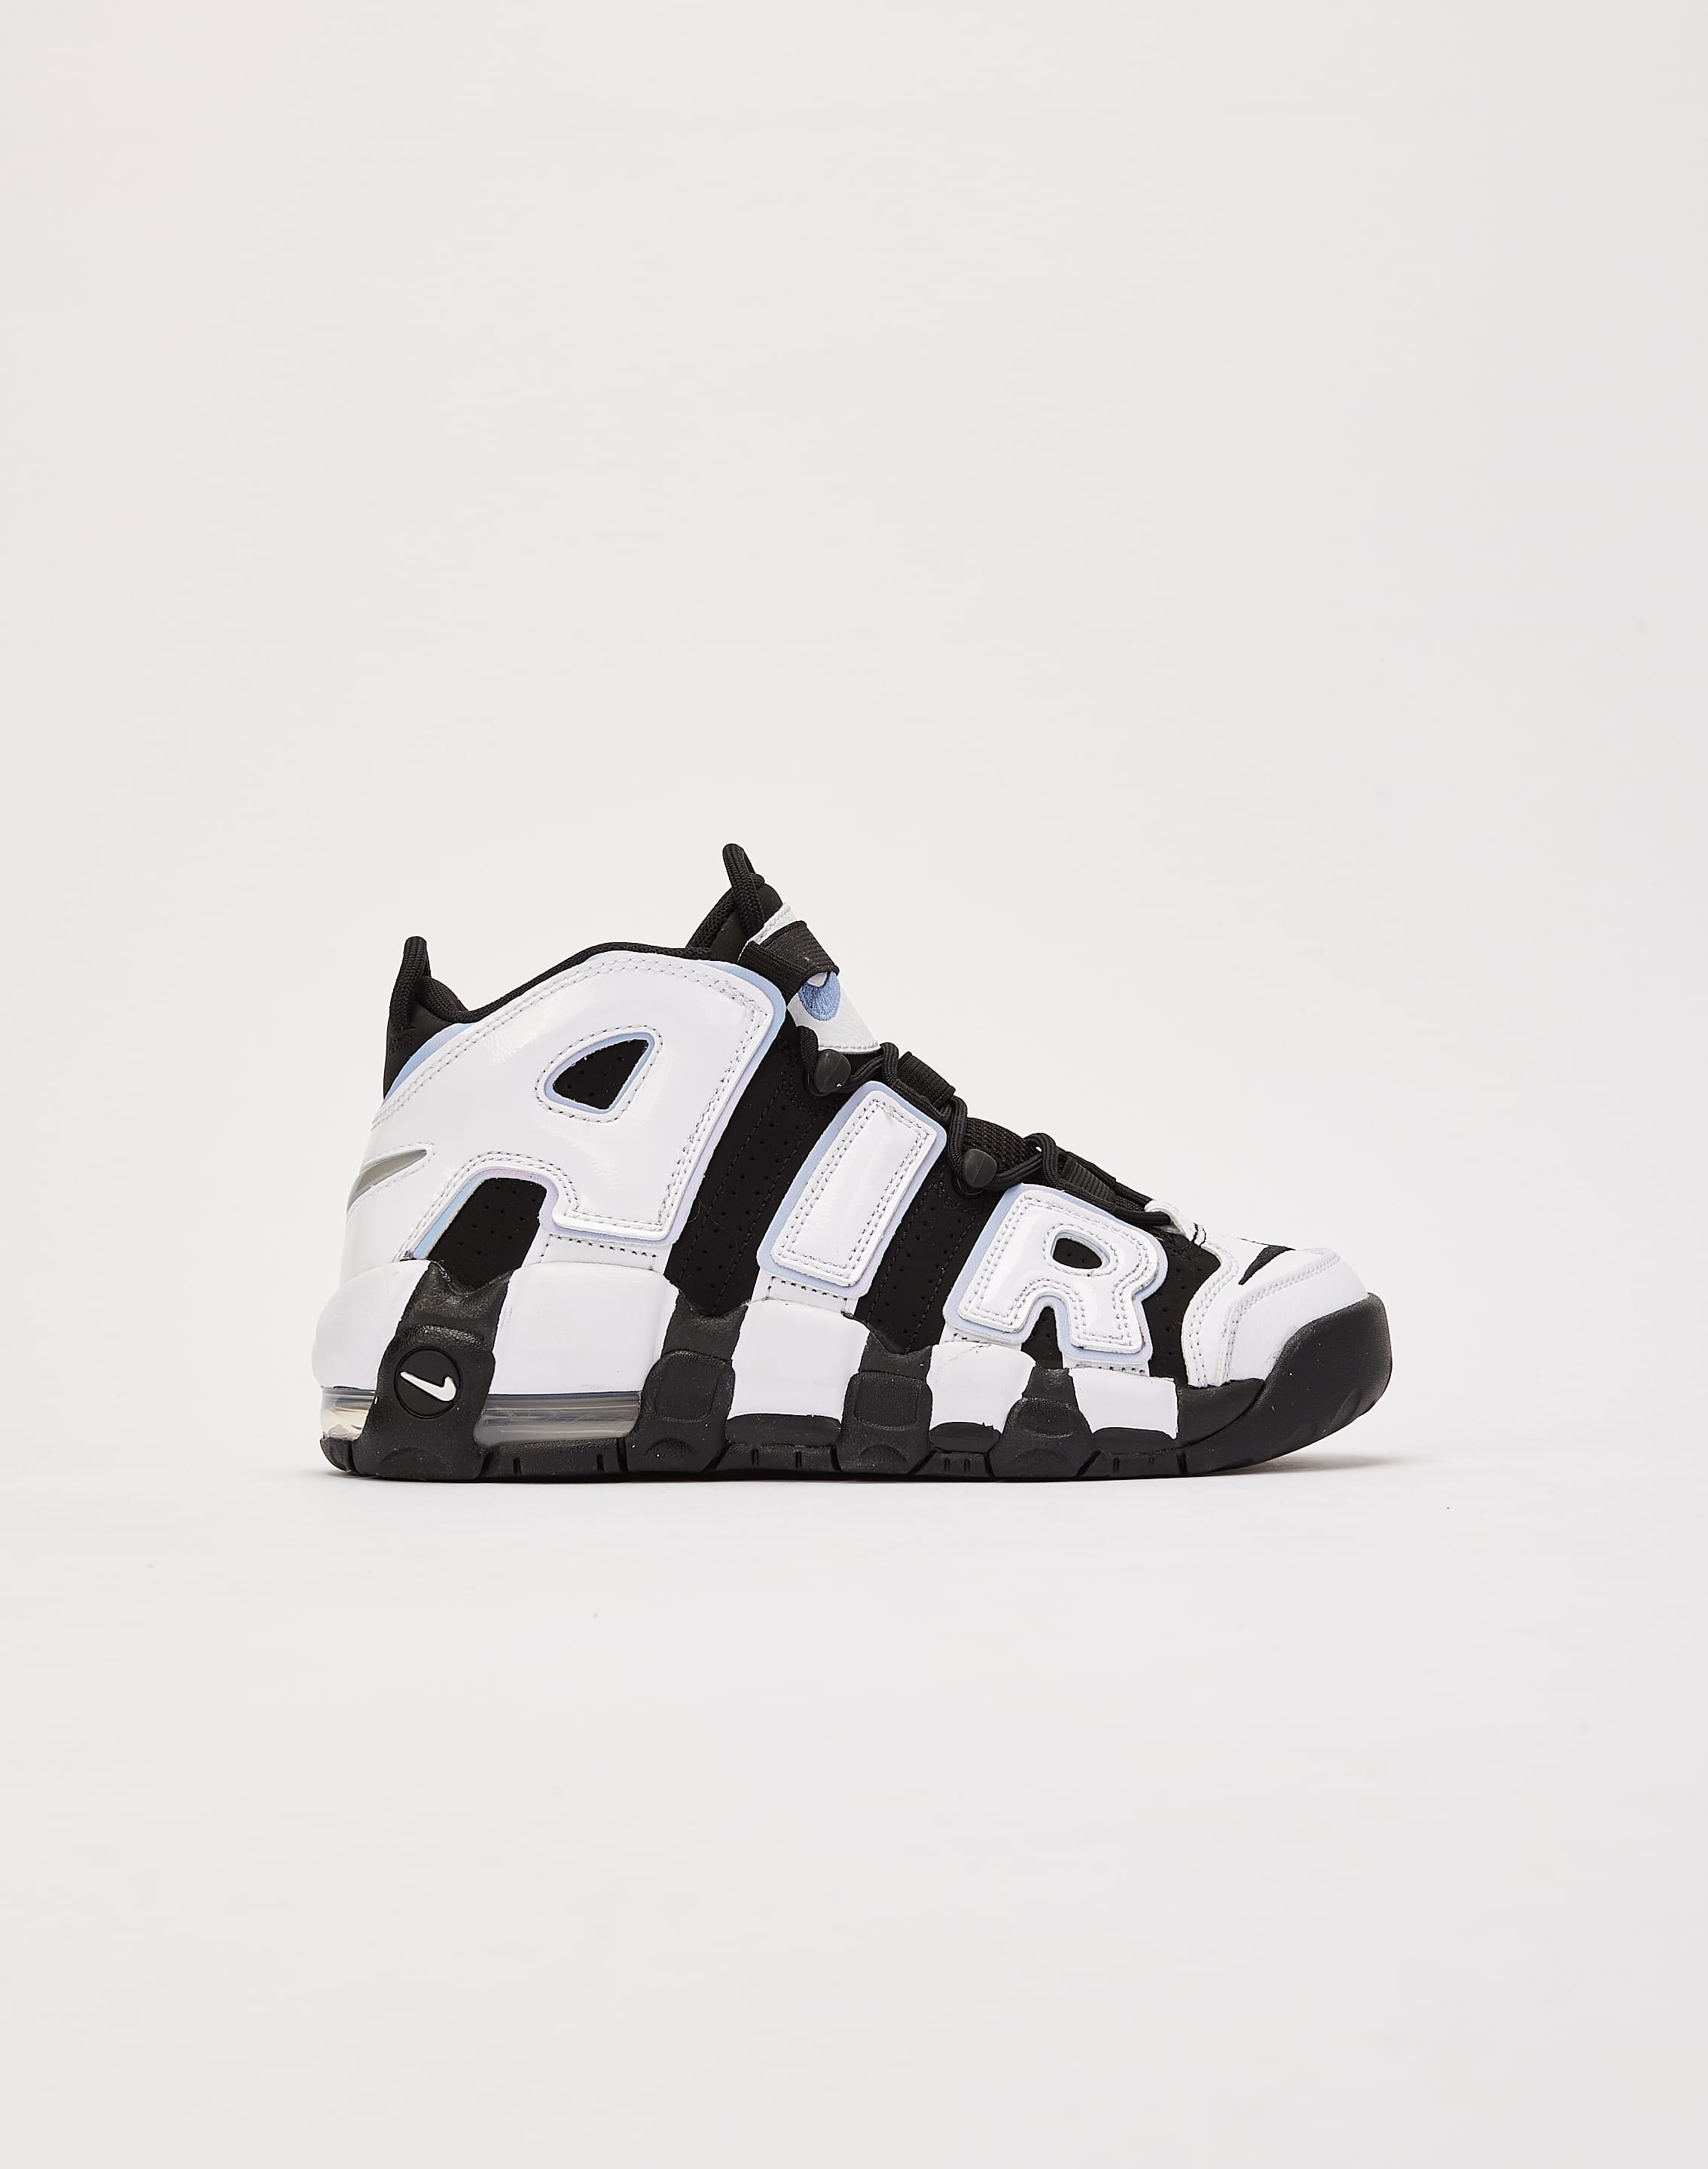 Nike Air More Uptempo '96 trading Cards – DTLR